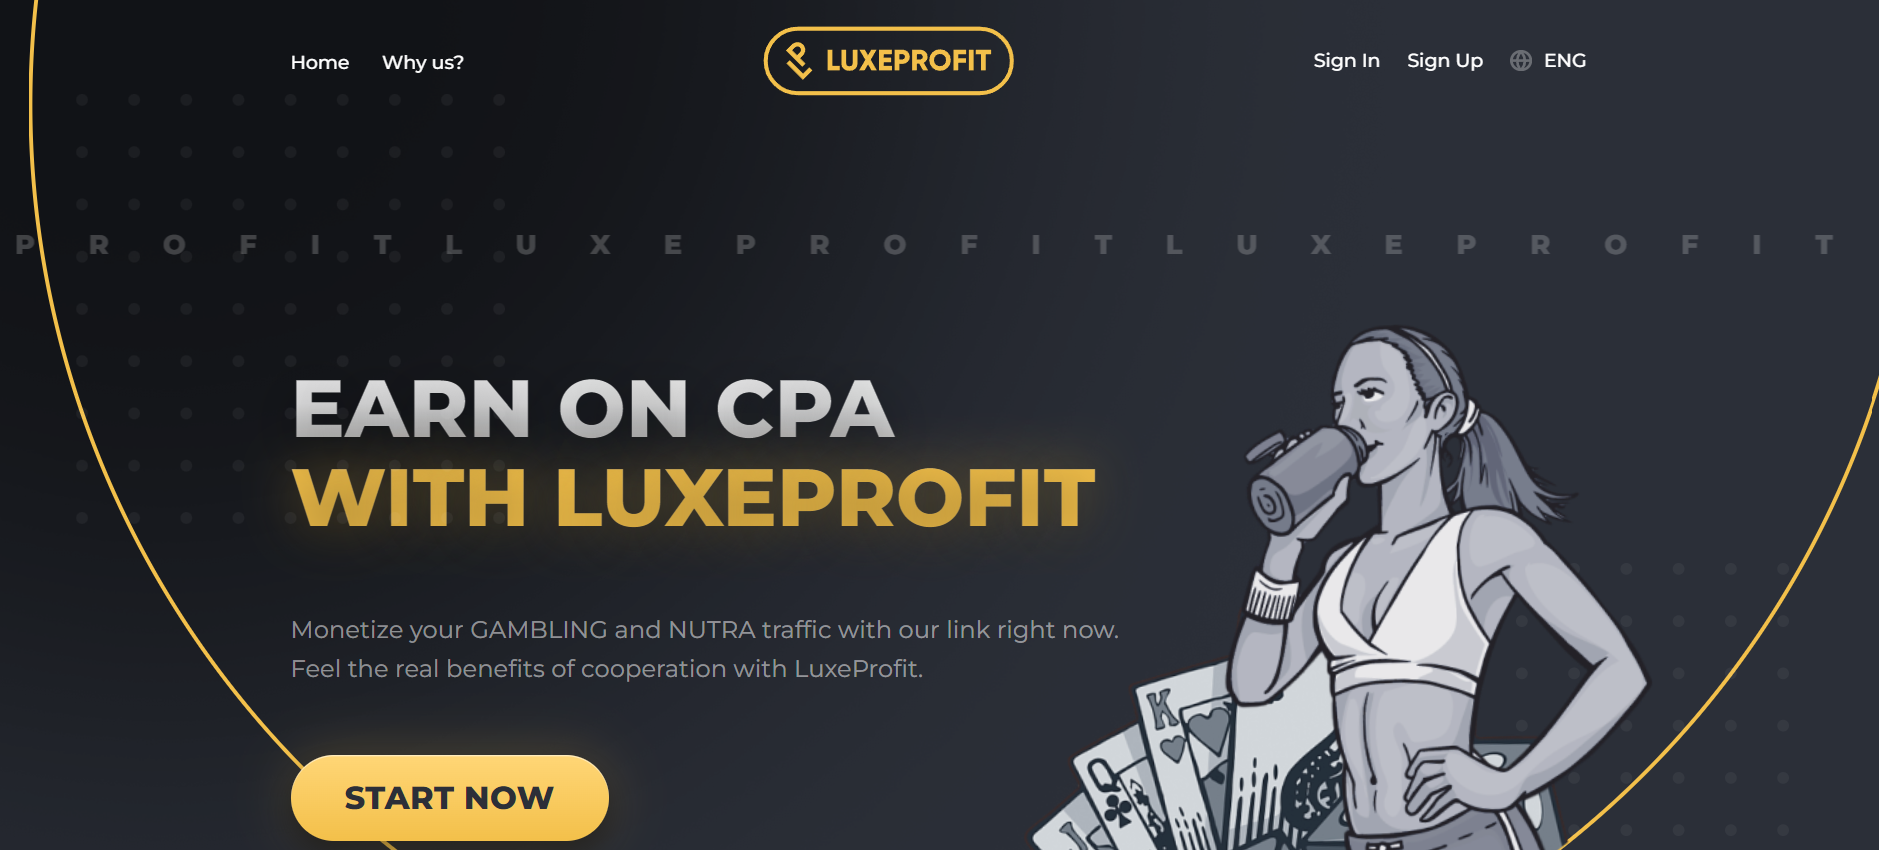 Luxeprofit Affiliate Network Review